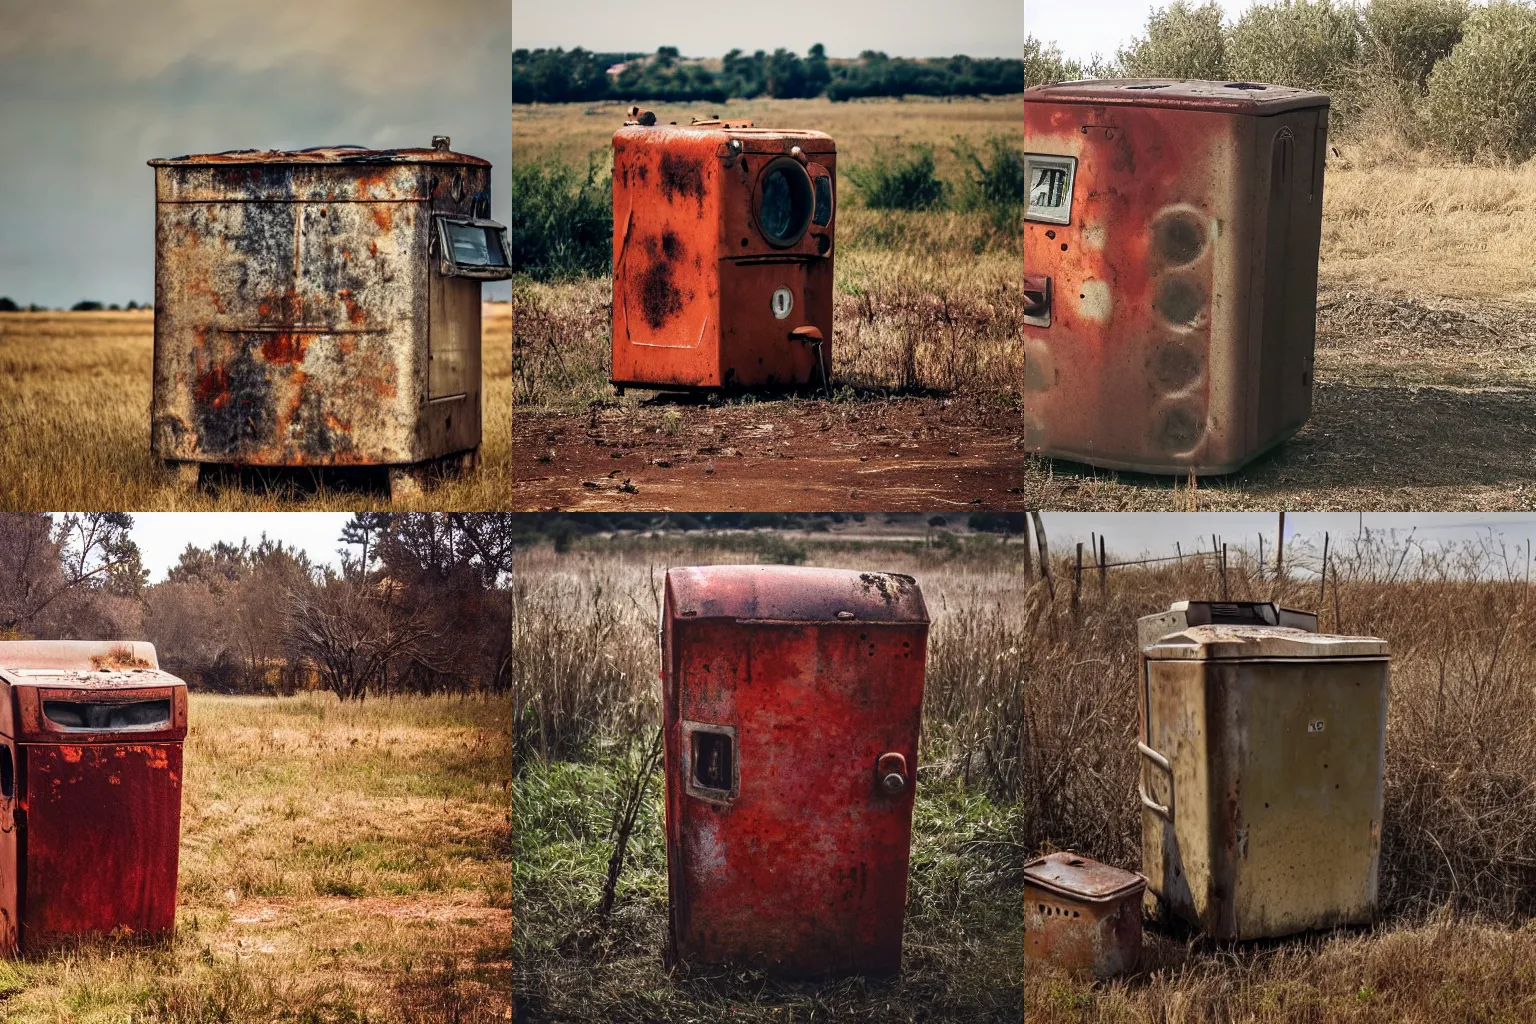 Prompt: a photo of a rusted washing machine that is on fire standing in a dried out field